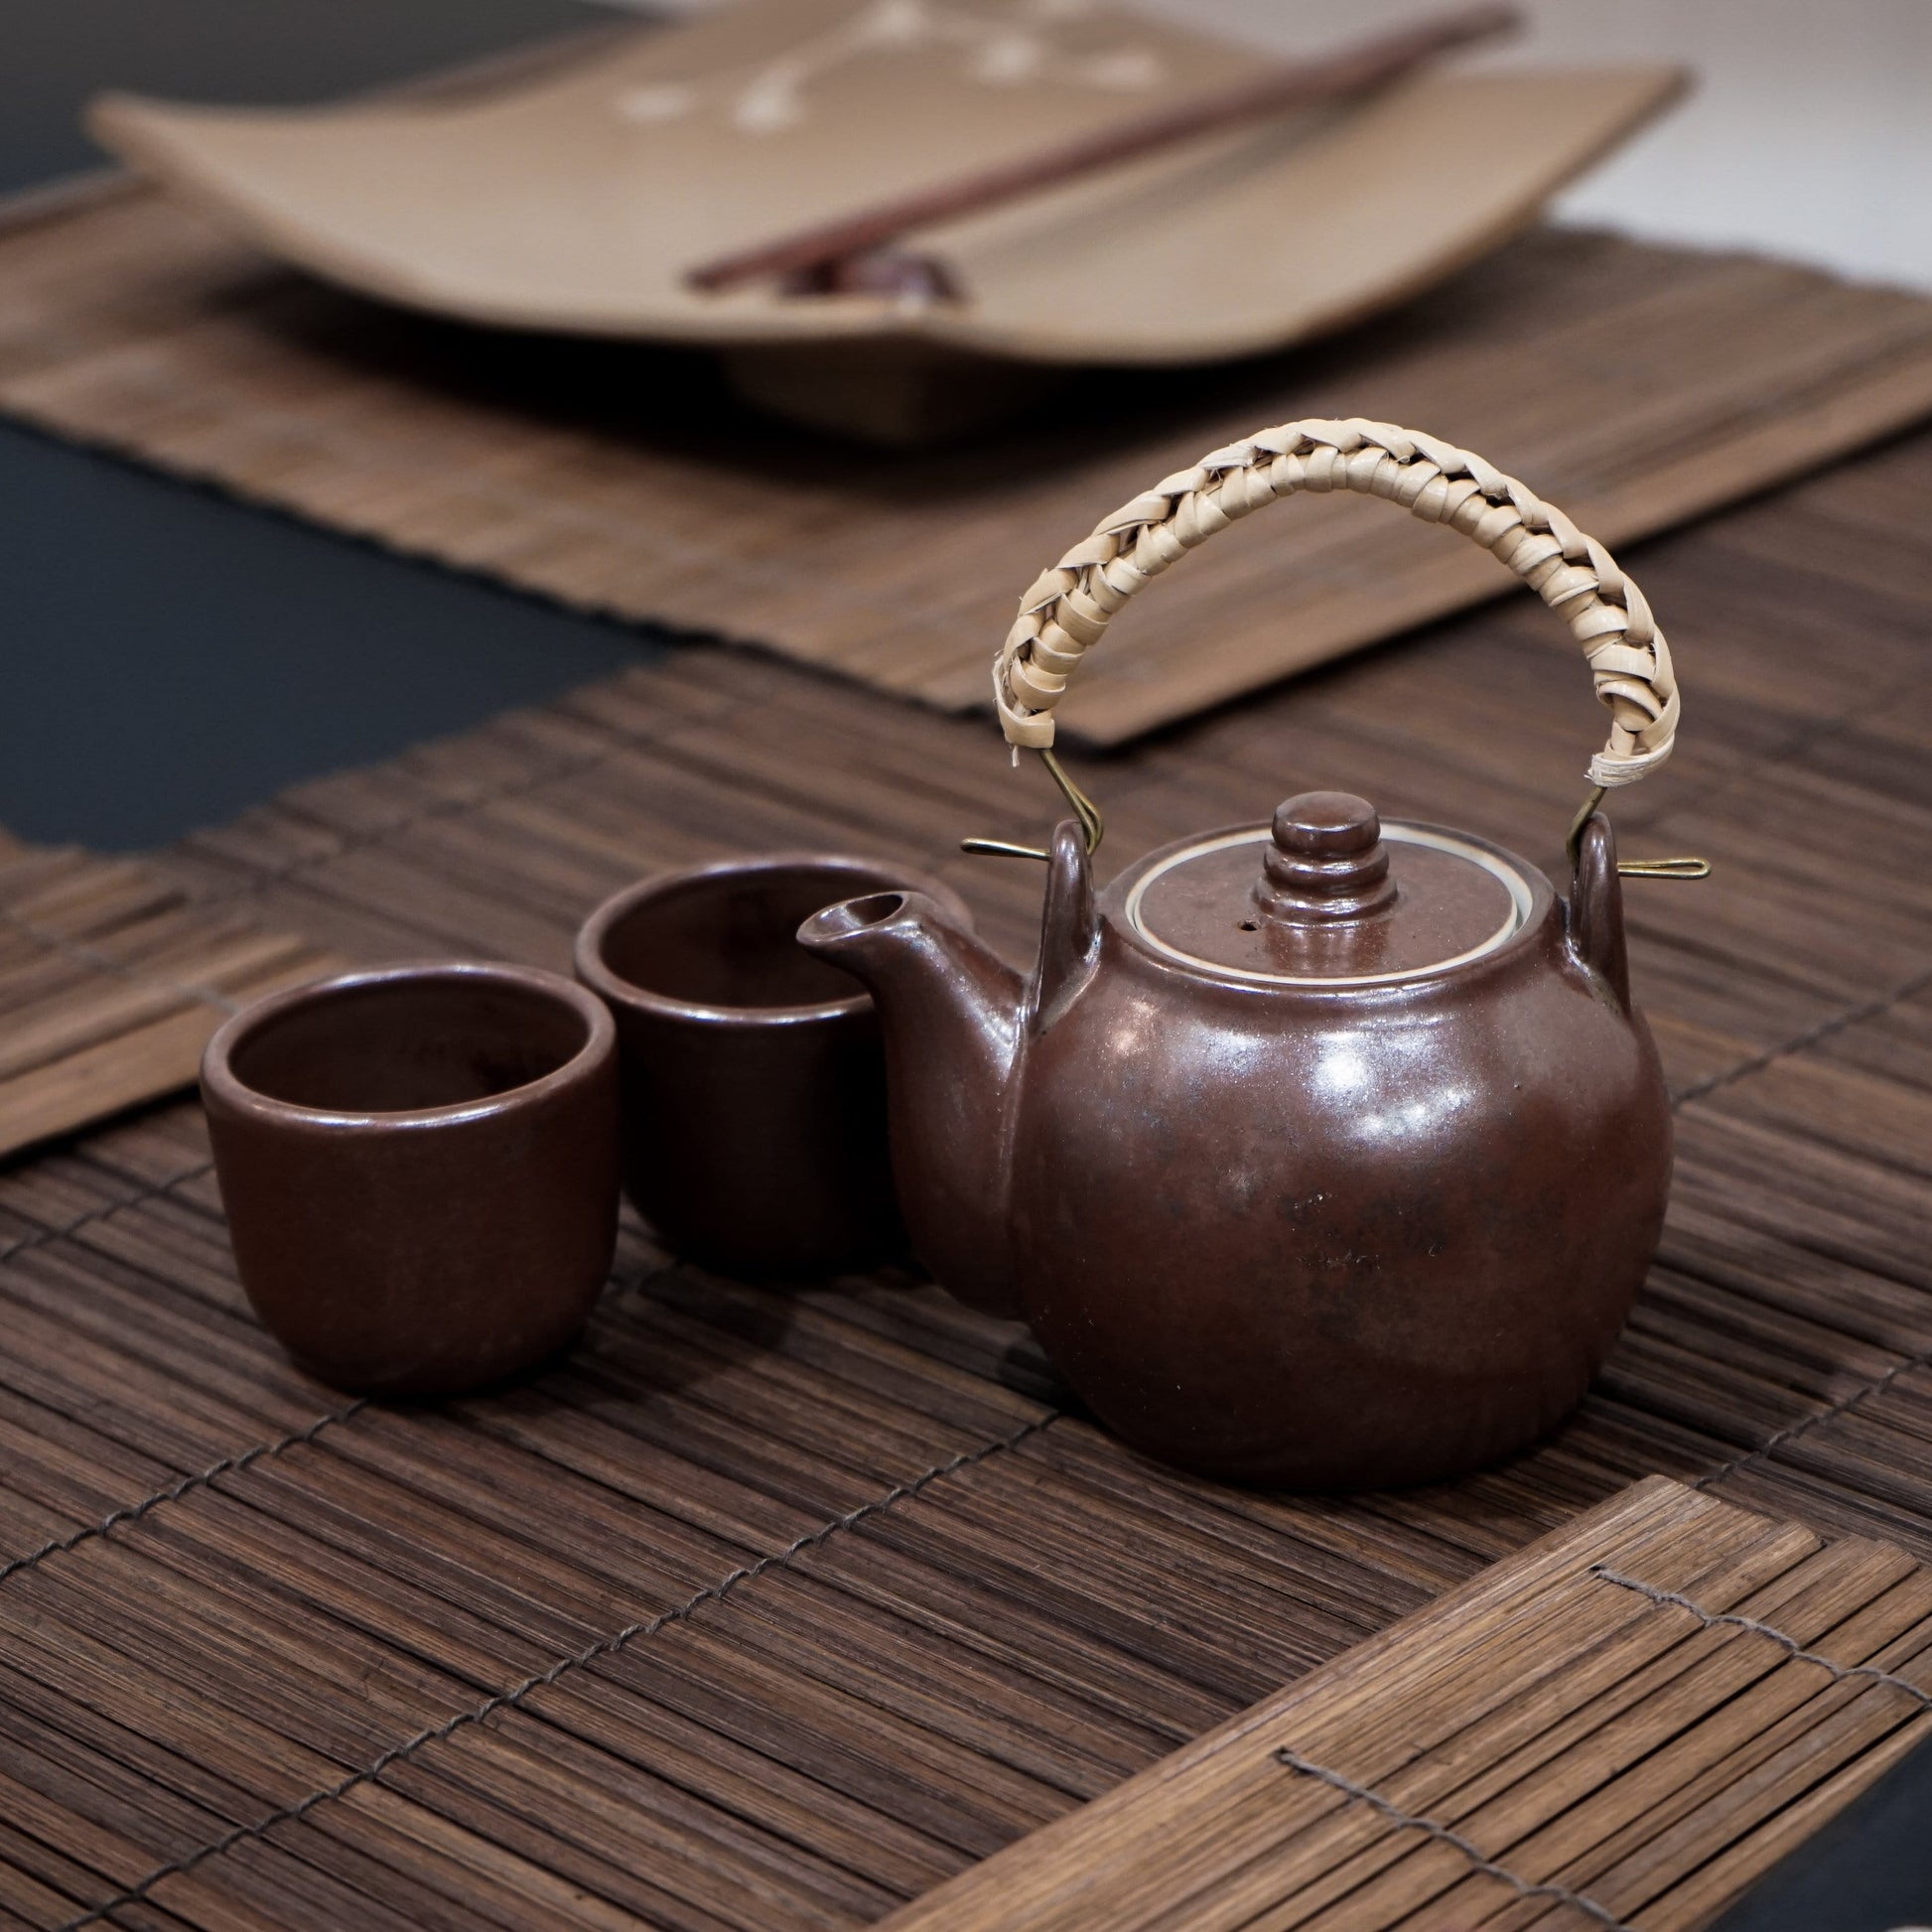 Handmade Chinese Teapot Set with 2 Cups - ShopGreenToday